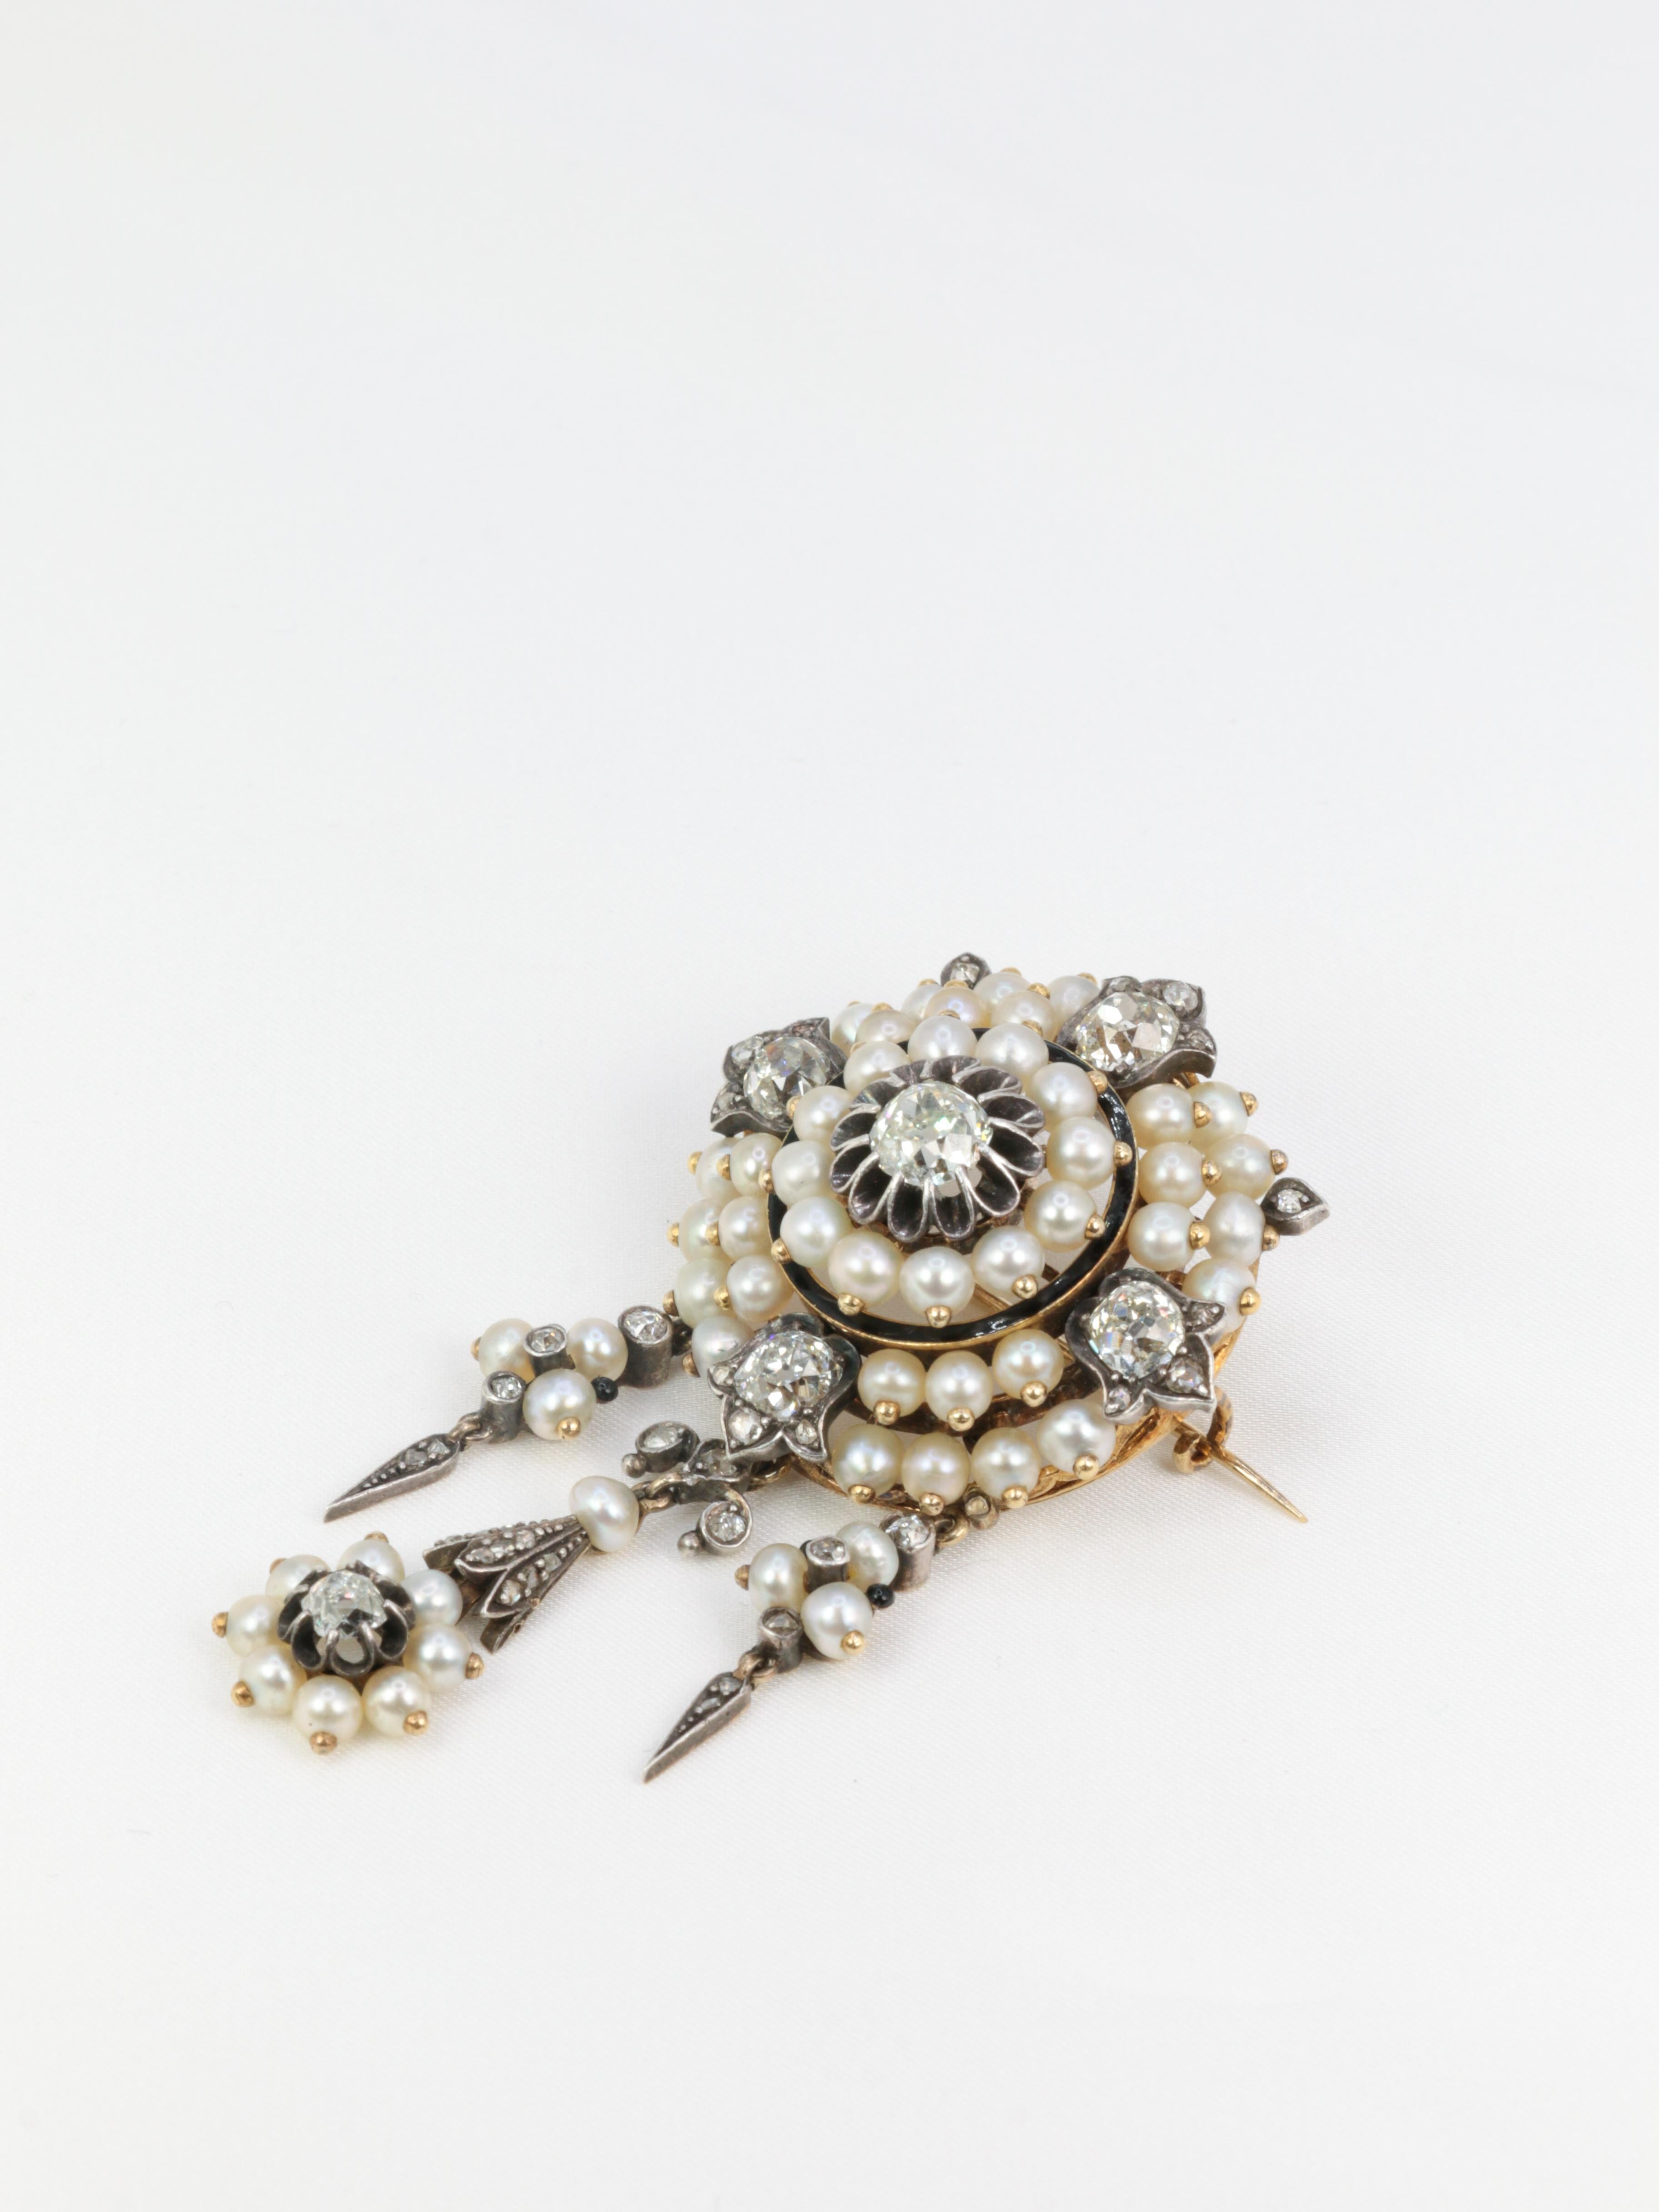 Women's or Men's Gold Antique Brooch / Corsage Front with Silver, Diamonds, Fine Pearls and Ename For Sale